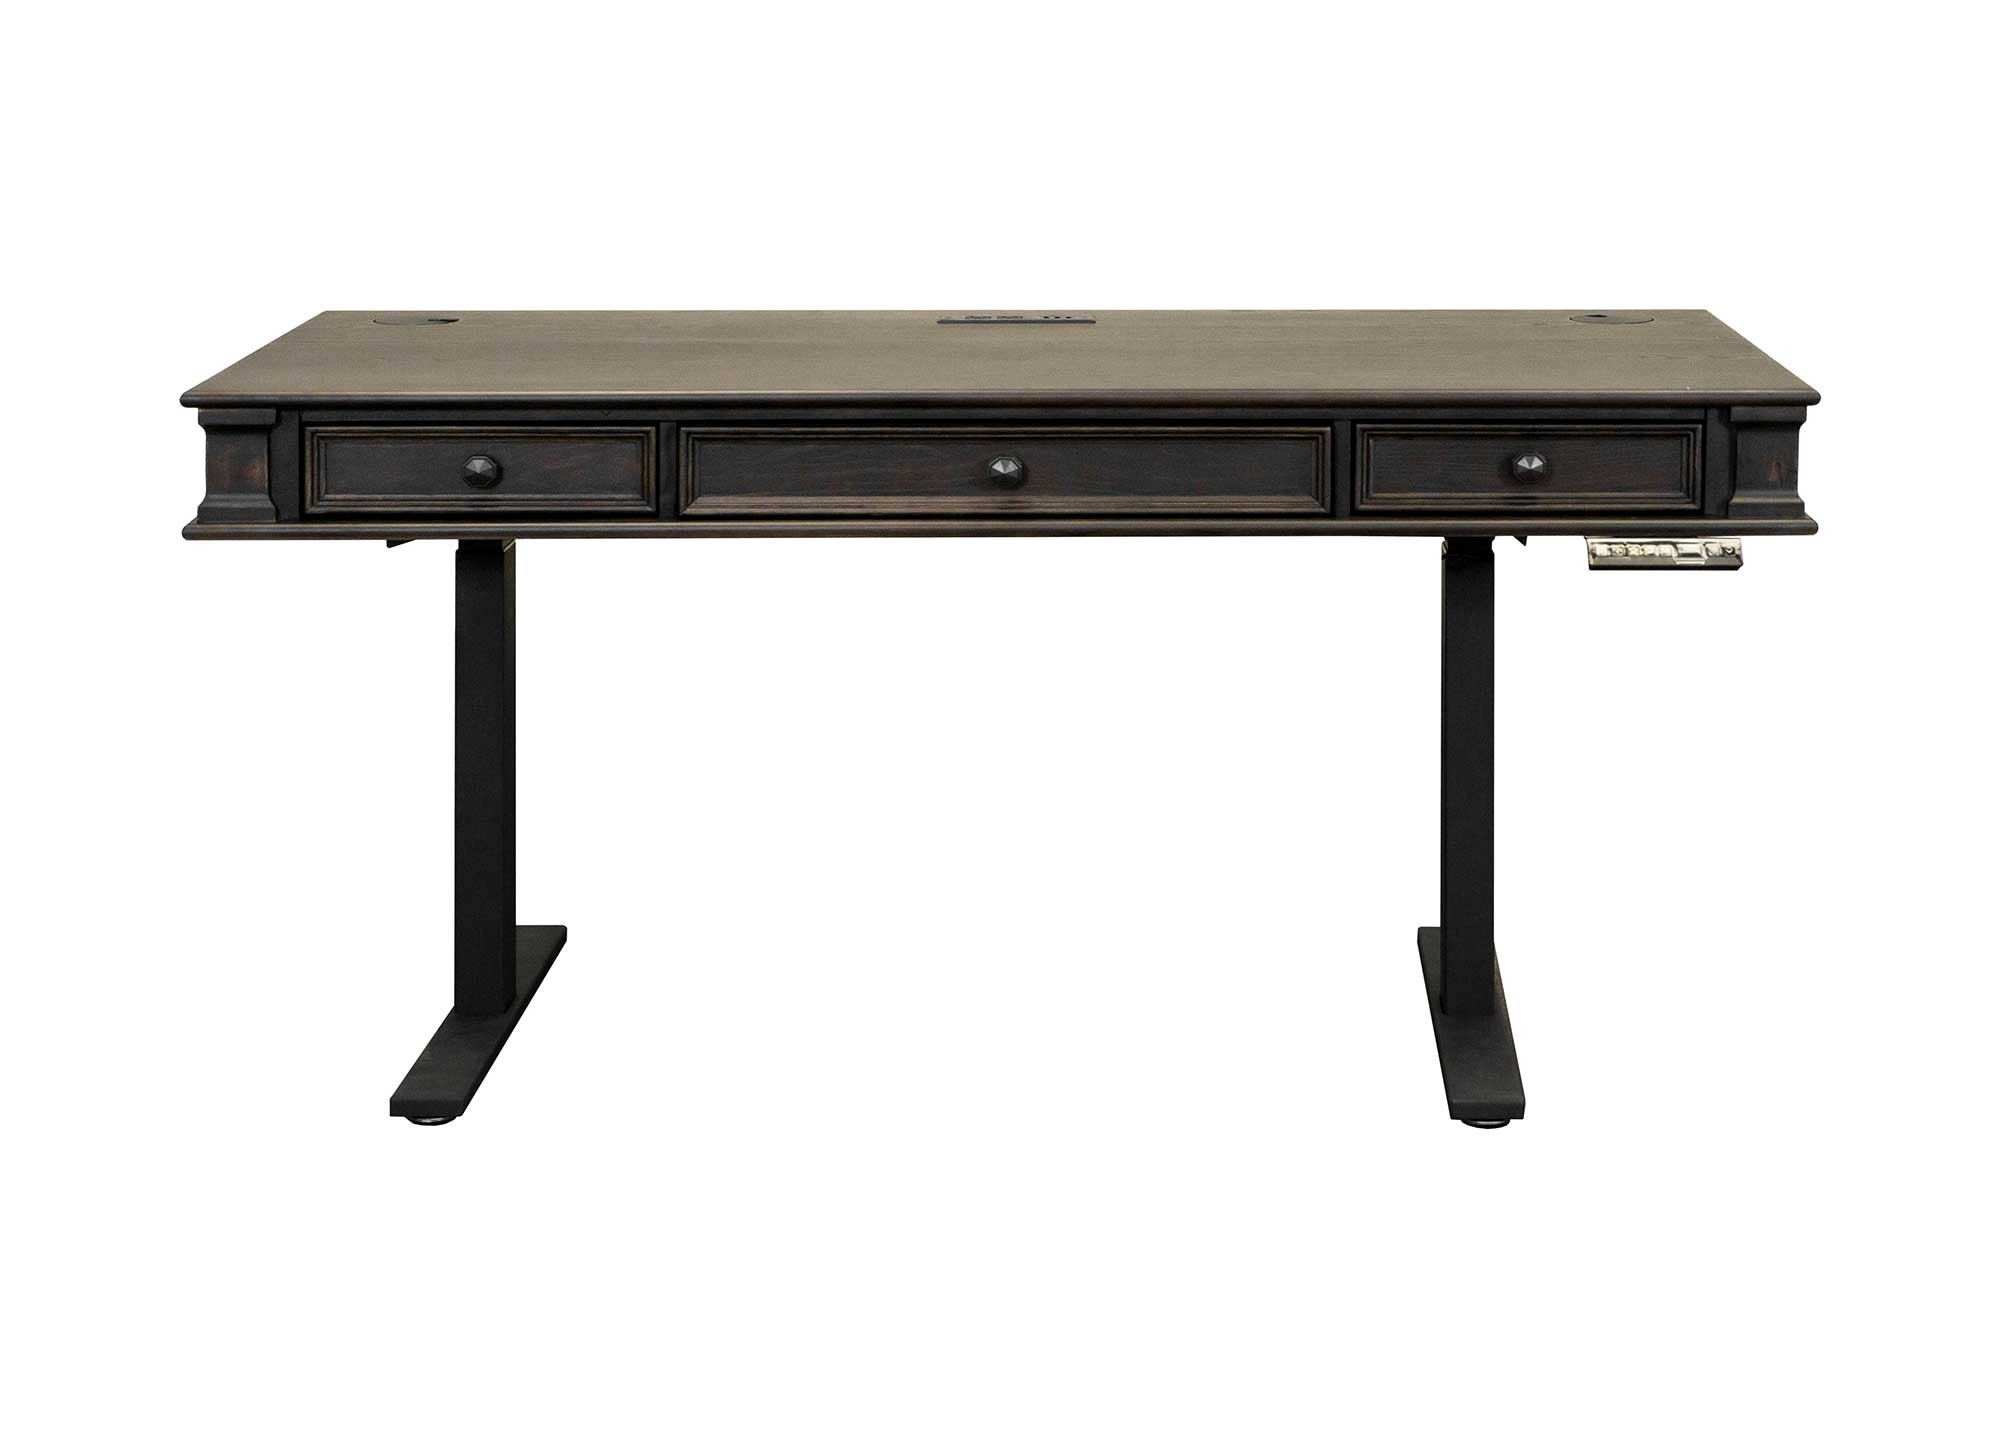 Kingston Electronic Sit/Stand Desk by Martin Furniture